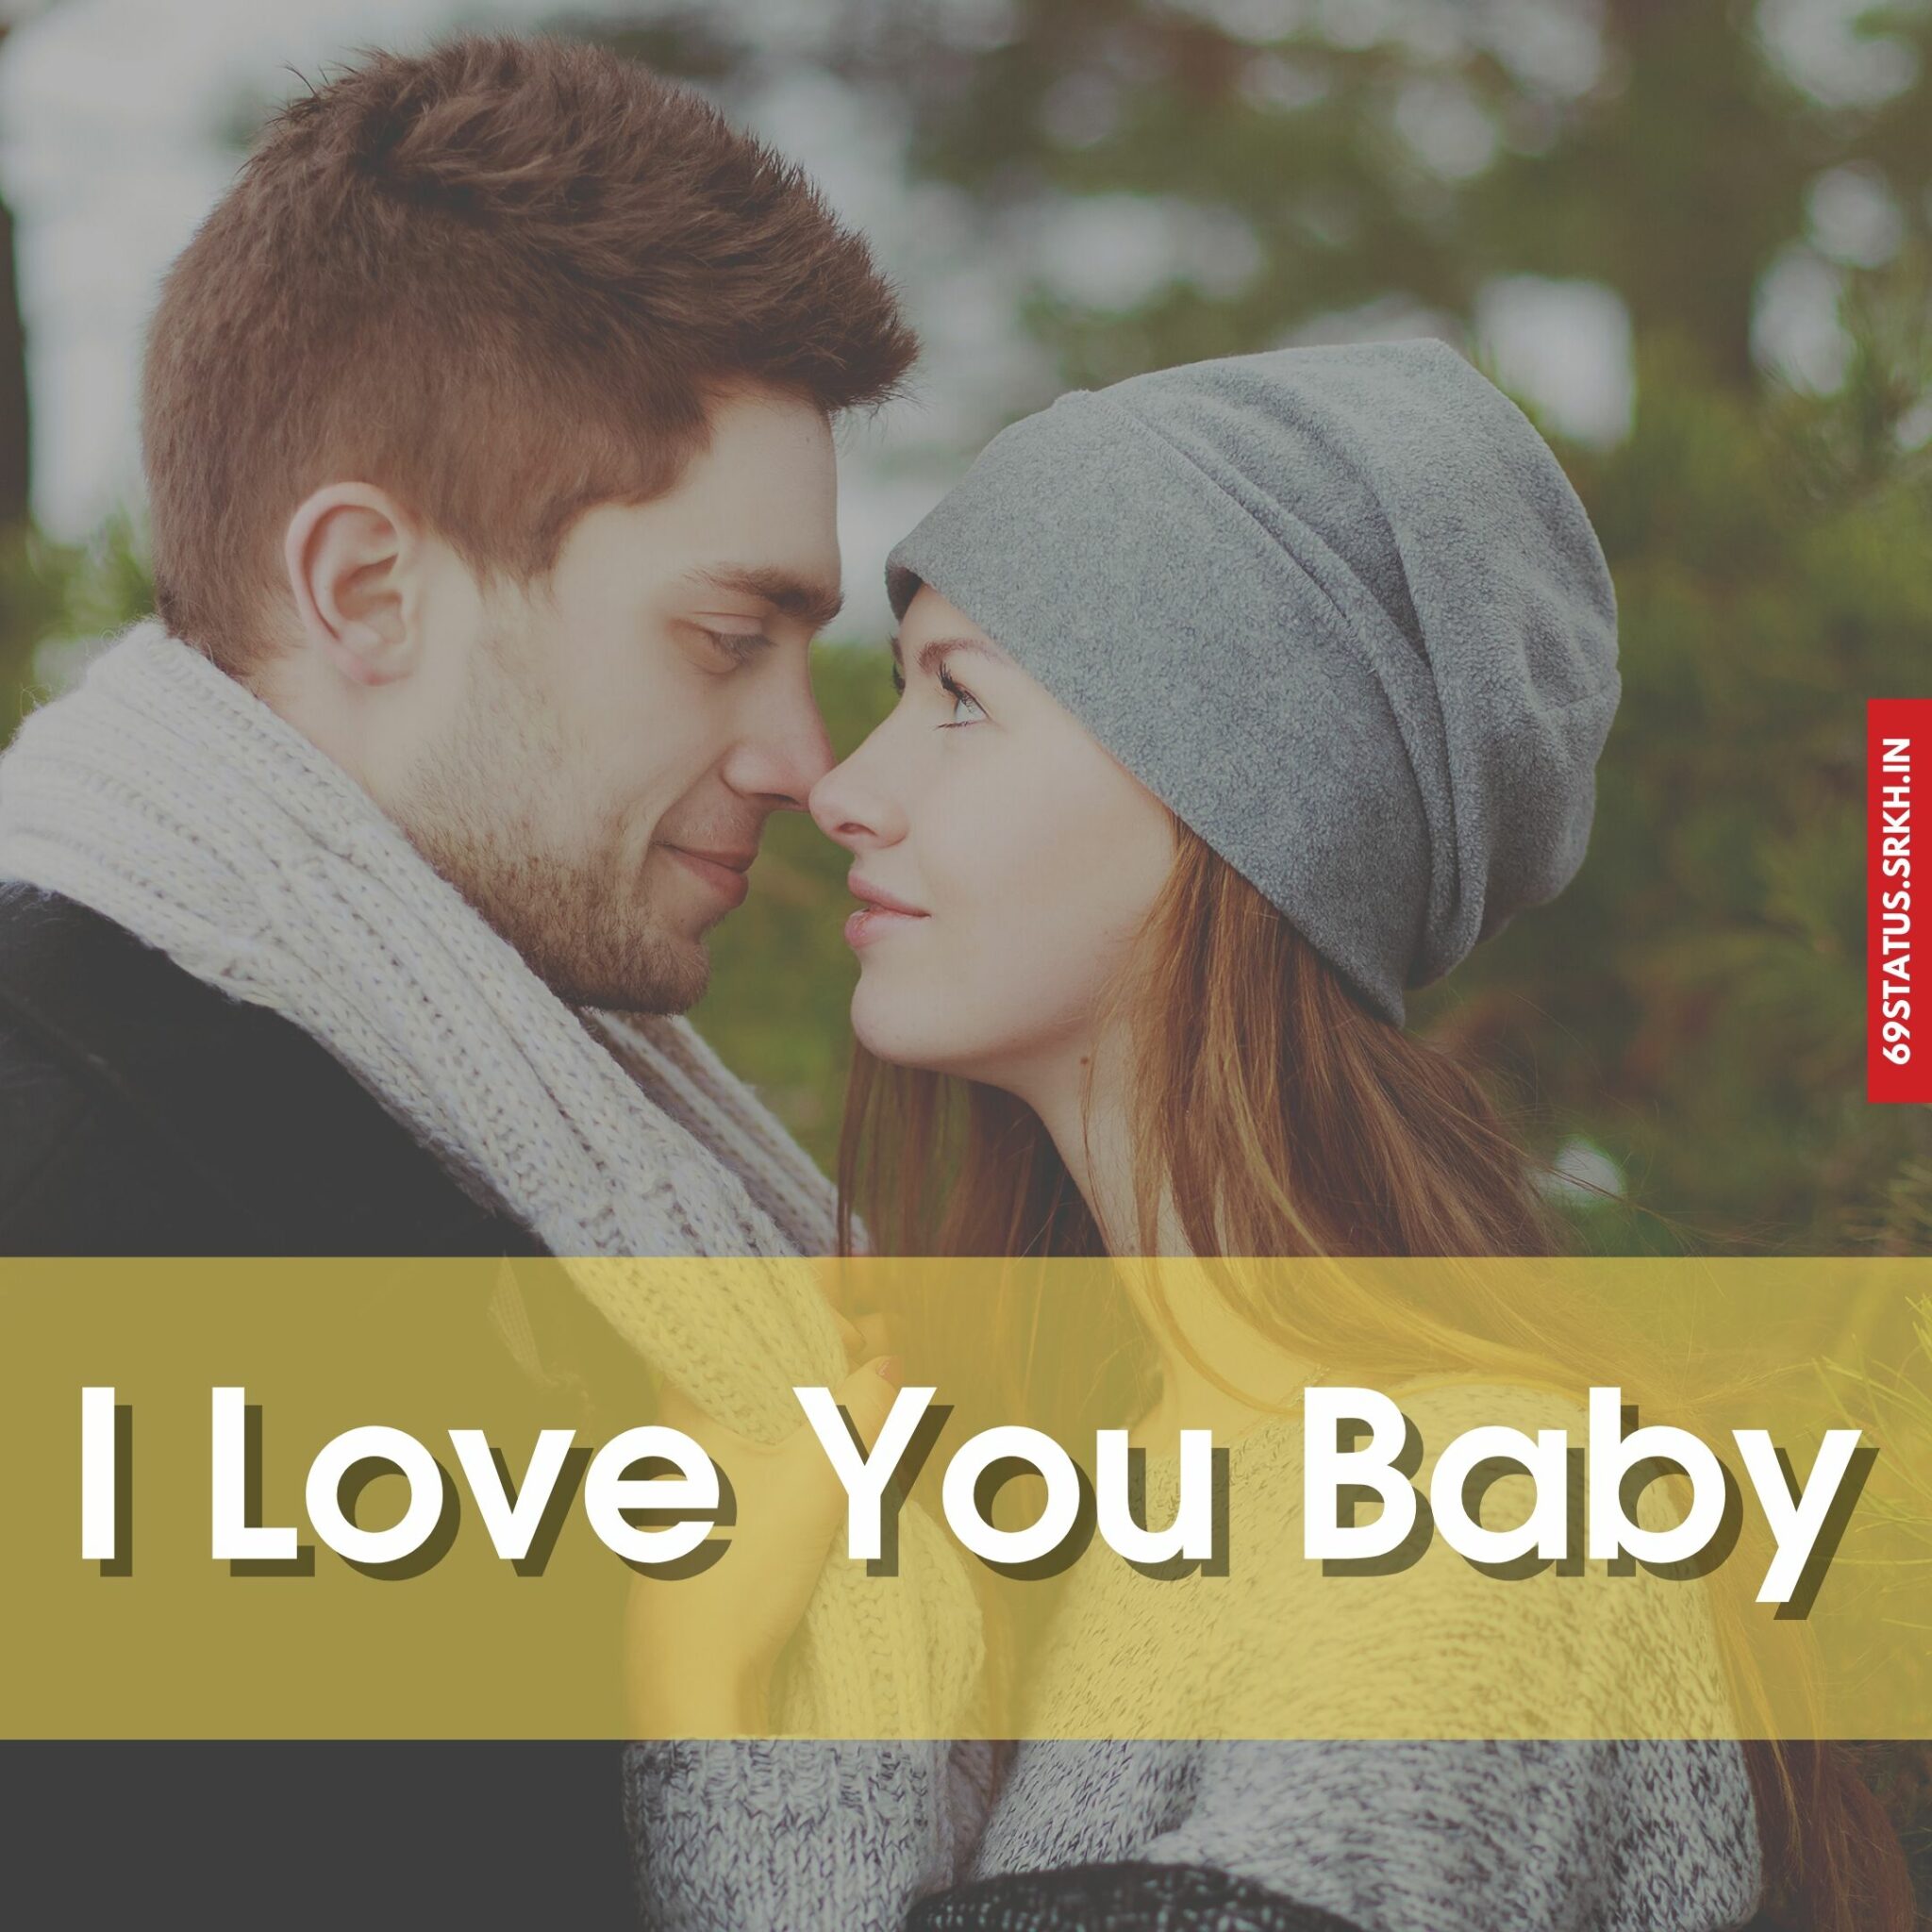 I Love You baby images hd